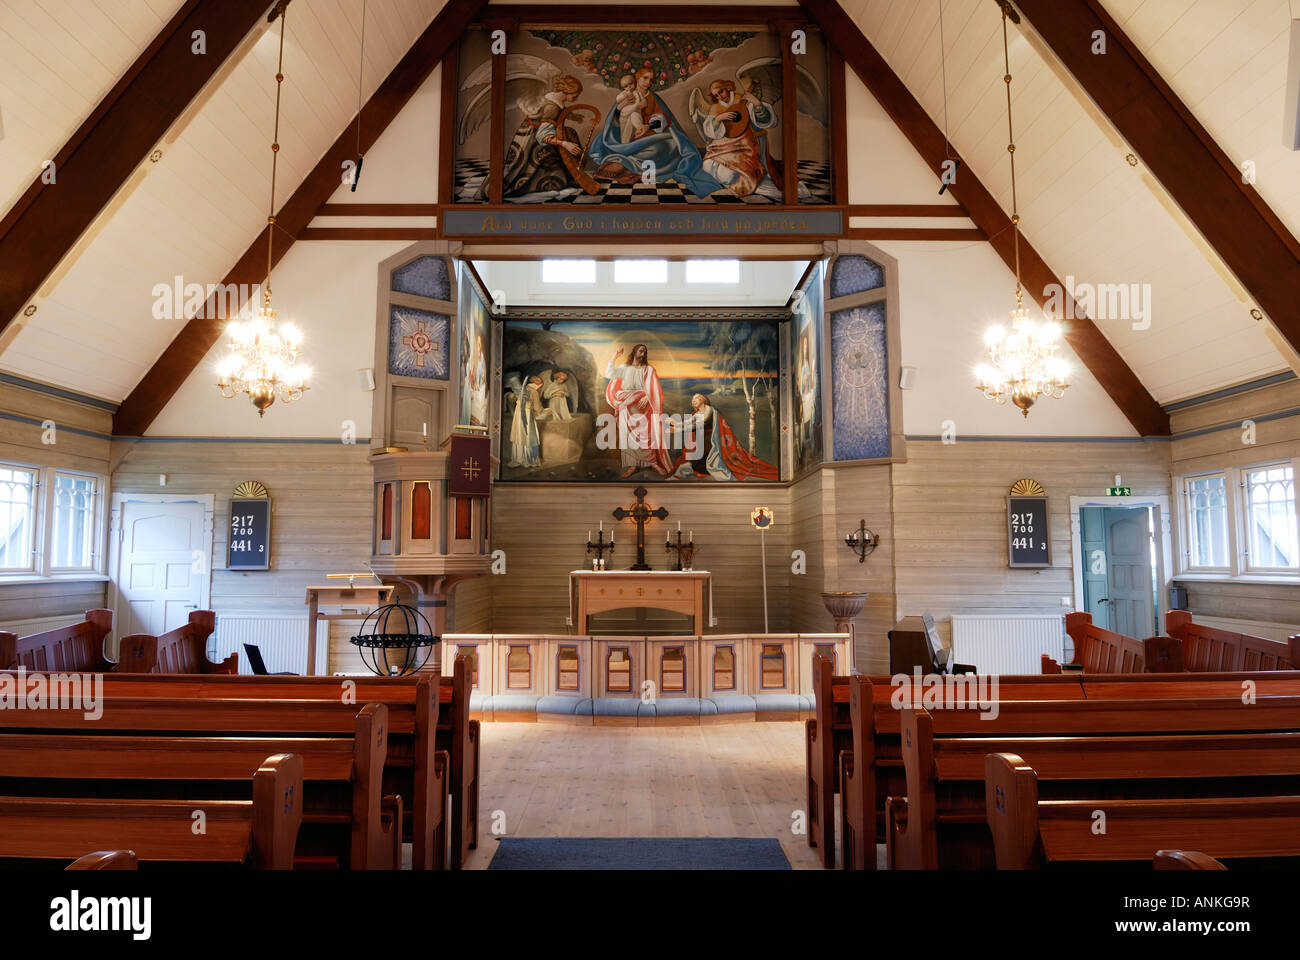 Interior of church altar and pews with mural of Jesus Stock Photo